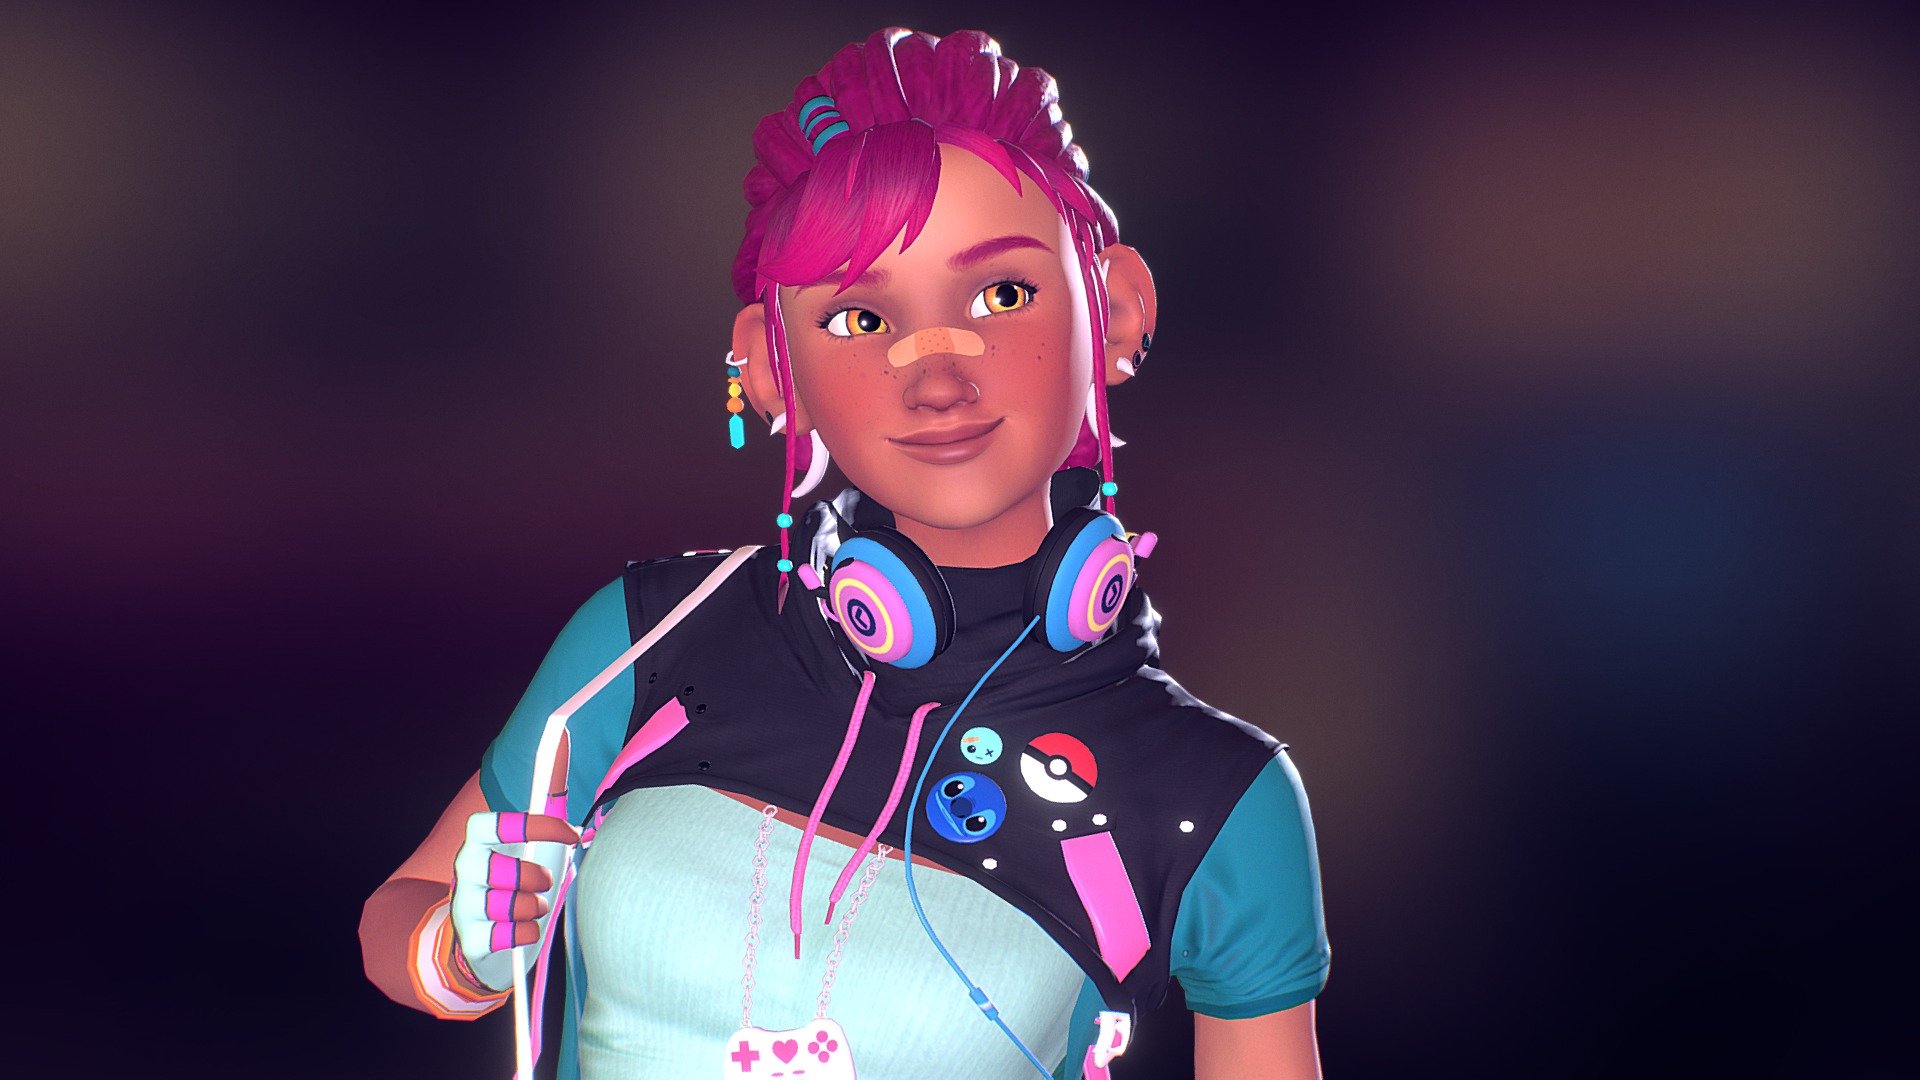 Meet Nova; a young girl with a burning passion for games, gadgets and everything with bright colors. She lives in future Japan where she works as an instructor teaching kids how to master a hoverboard. However, she is secretly dreaming about becoming a legendary zombie slayer once the, inevitable, apocalypse begins. For now though she makes do with the digital experience, and to be fair, it’s not like zombies are a rare finding in games these days 3d model